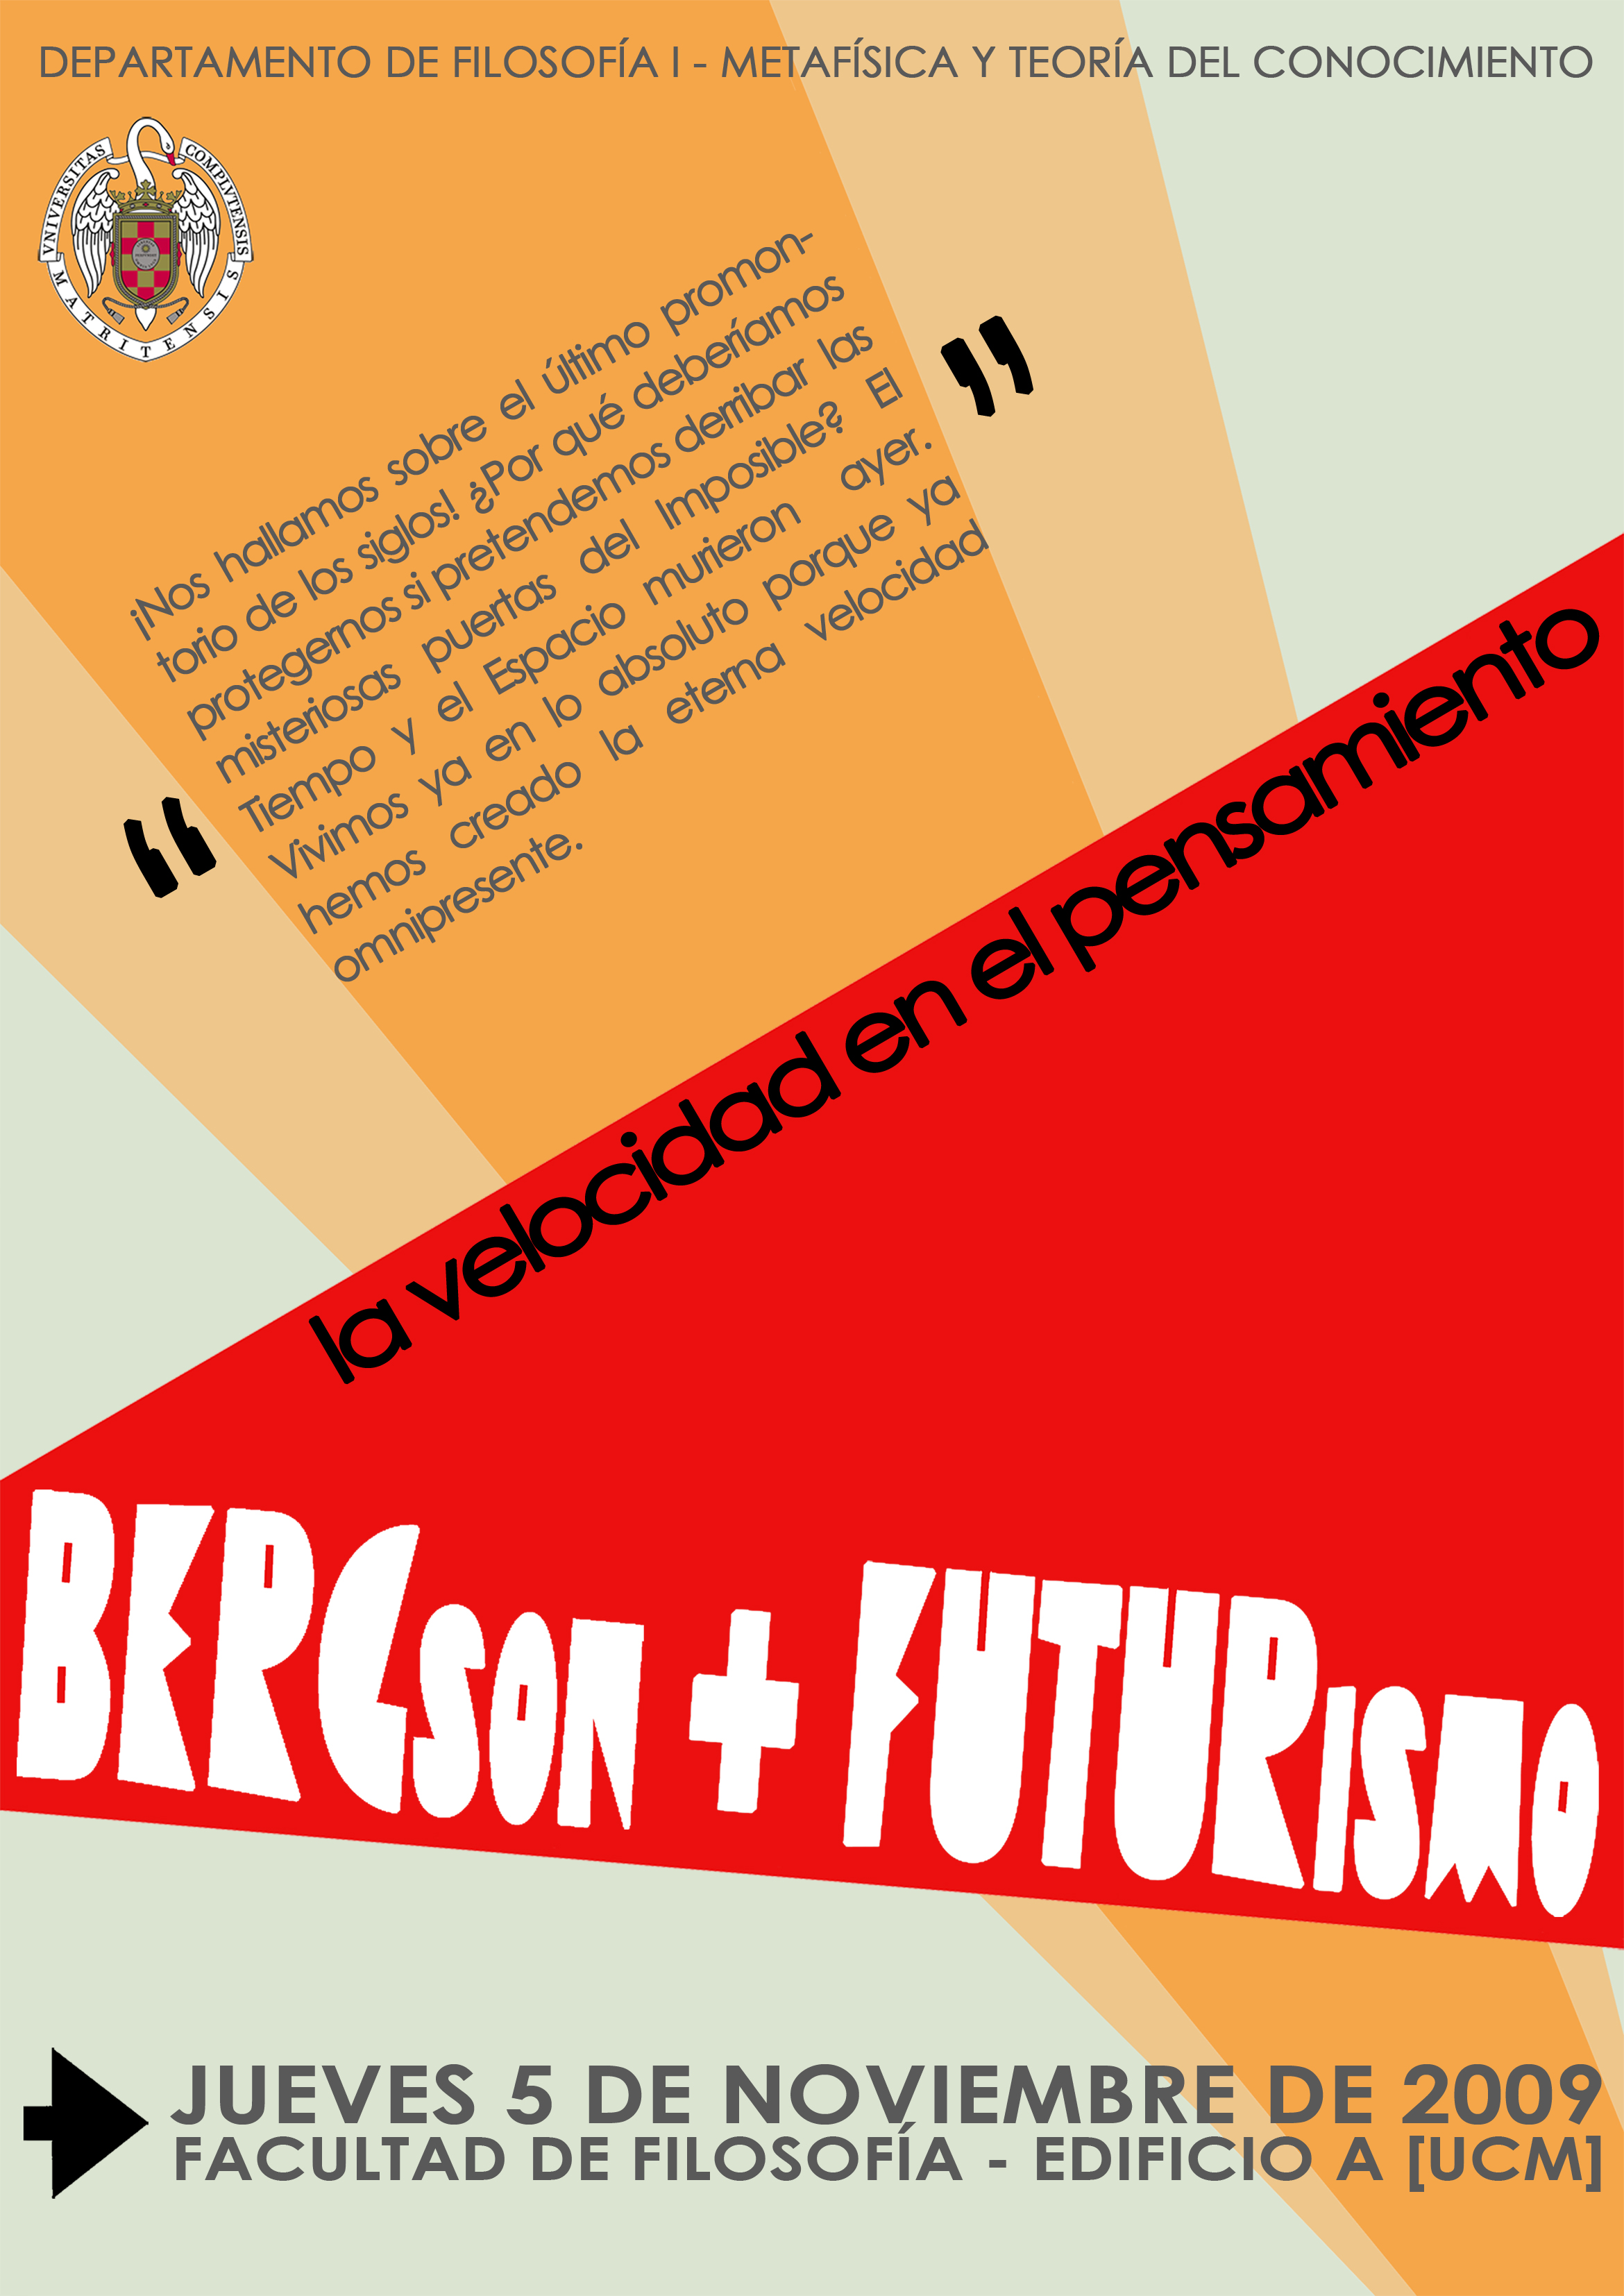 Call for Papers: ‘Bergson + Futurism: Speed in thought’